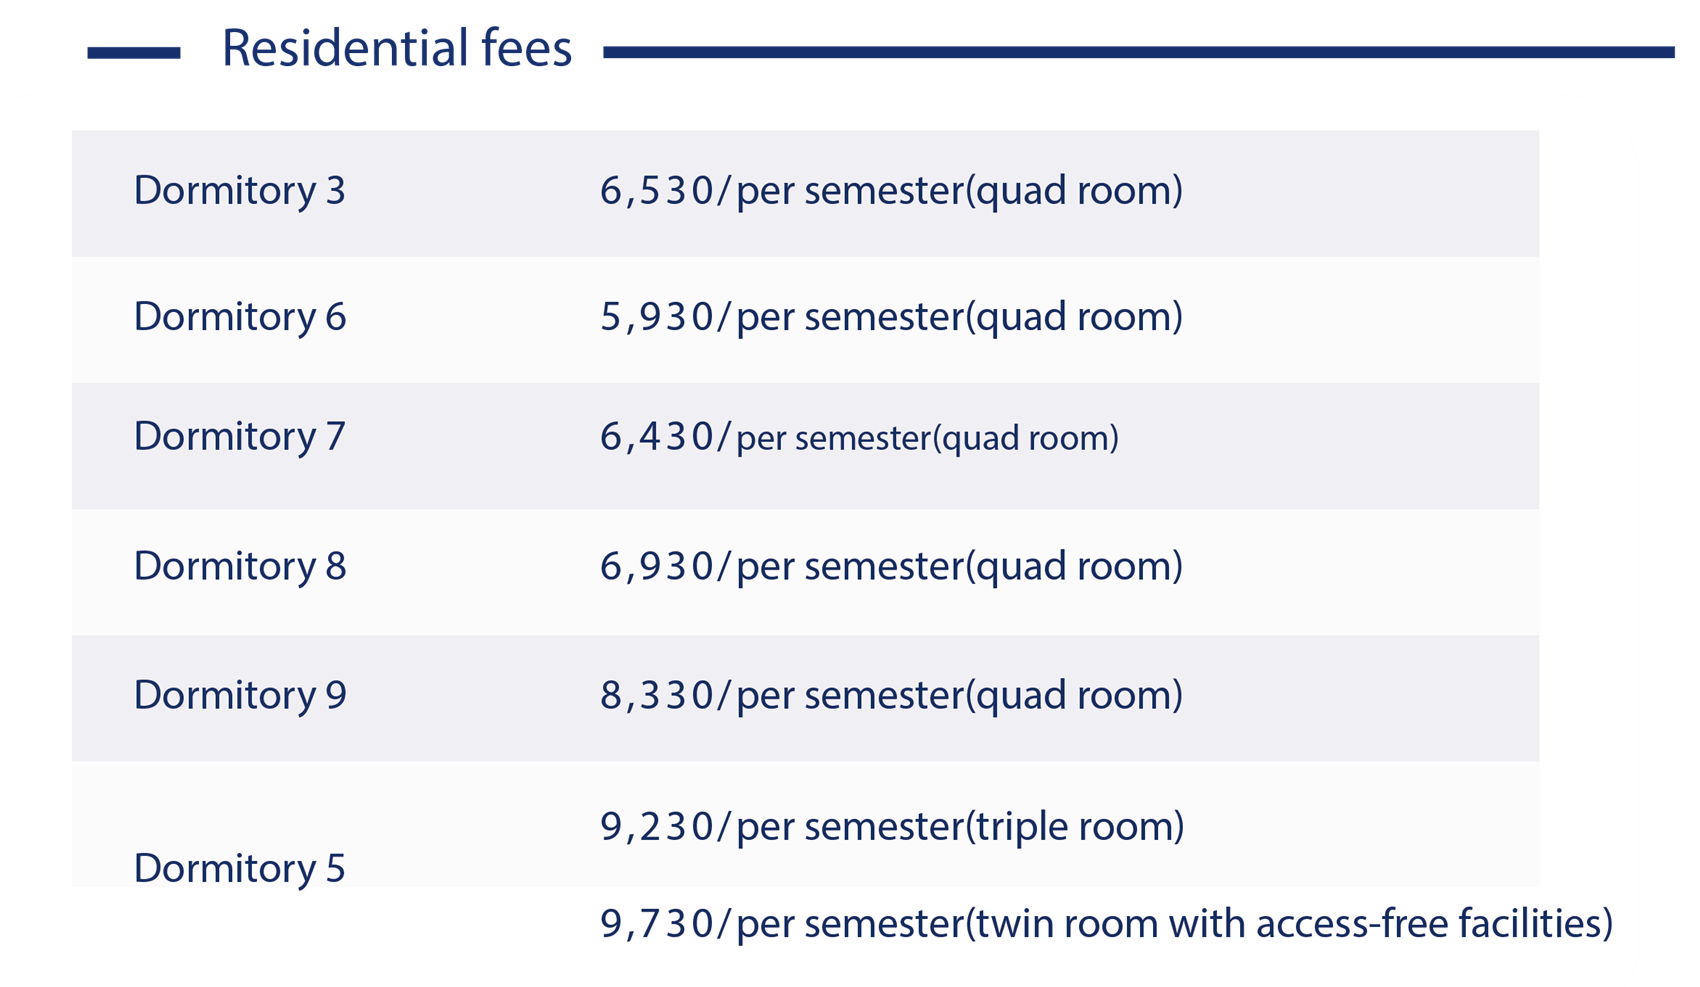 Here is the residential fees of school dormitory in NCUE